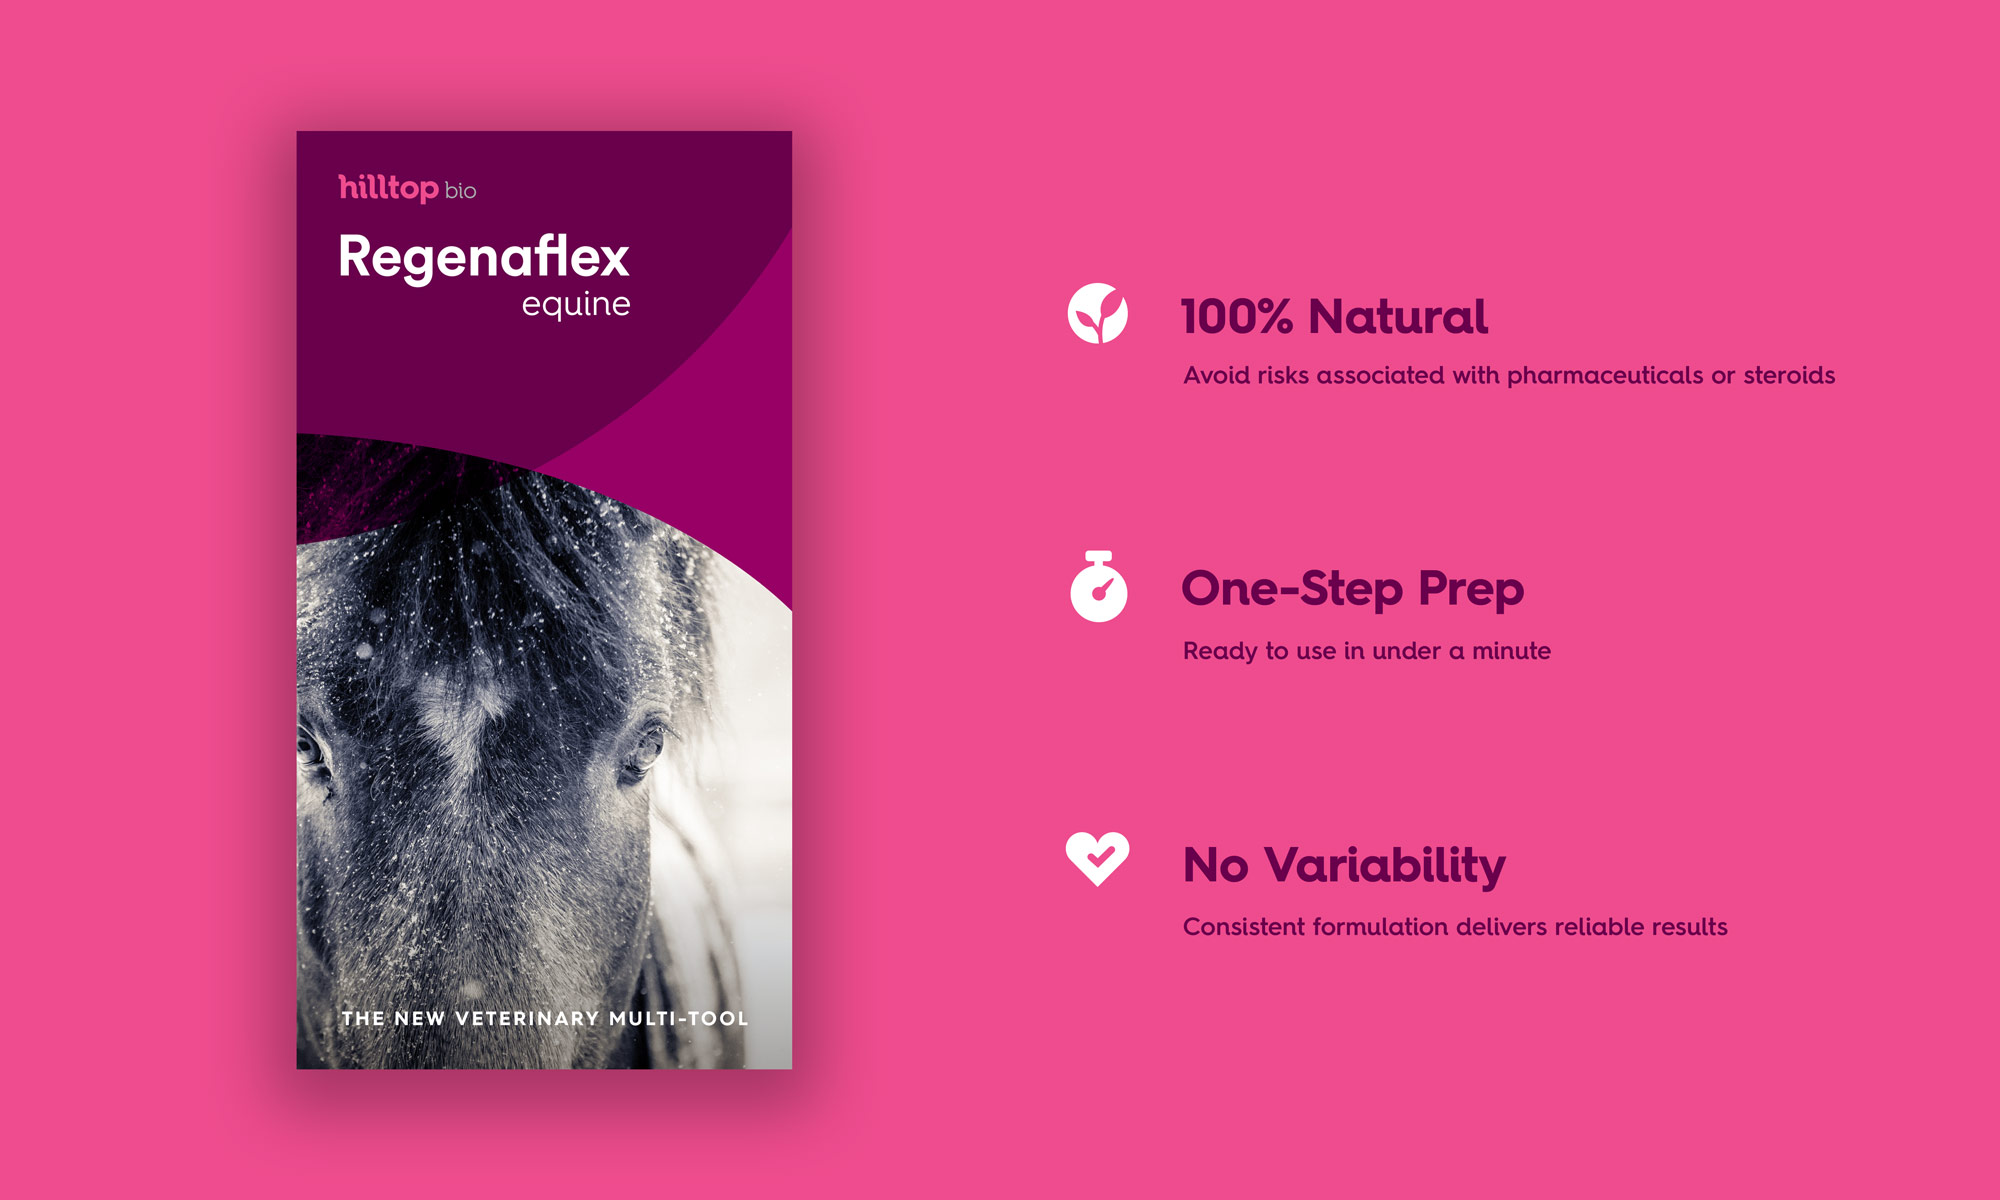 Promotional brochure cover and proof points: 100% Natural, Avoid risks associated with pharmaceuticals or steroids; One-Step Prep, Ready to use in under a minute: No Variability, Consistent formulation delivers reliable results